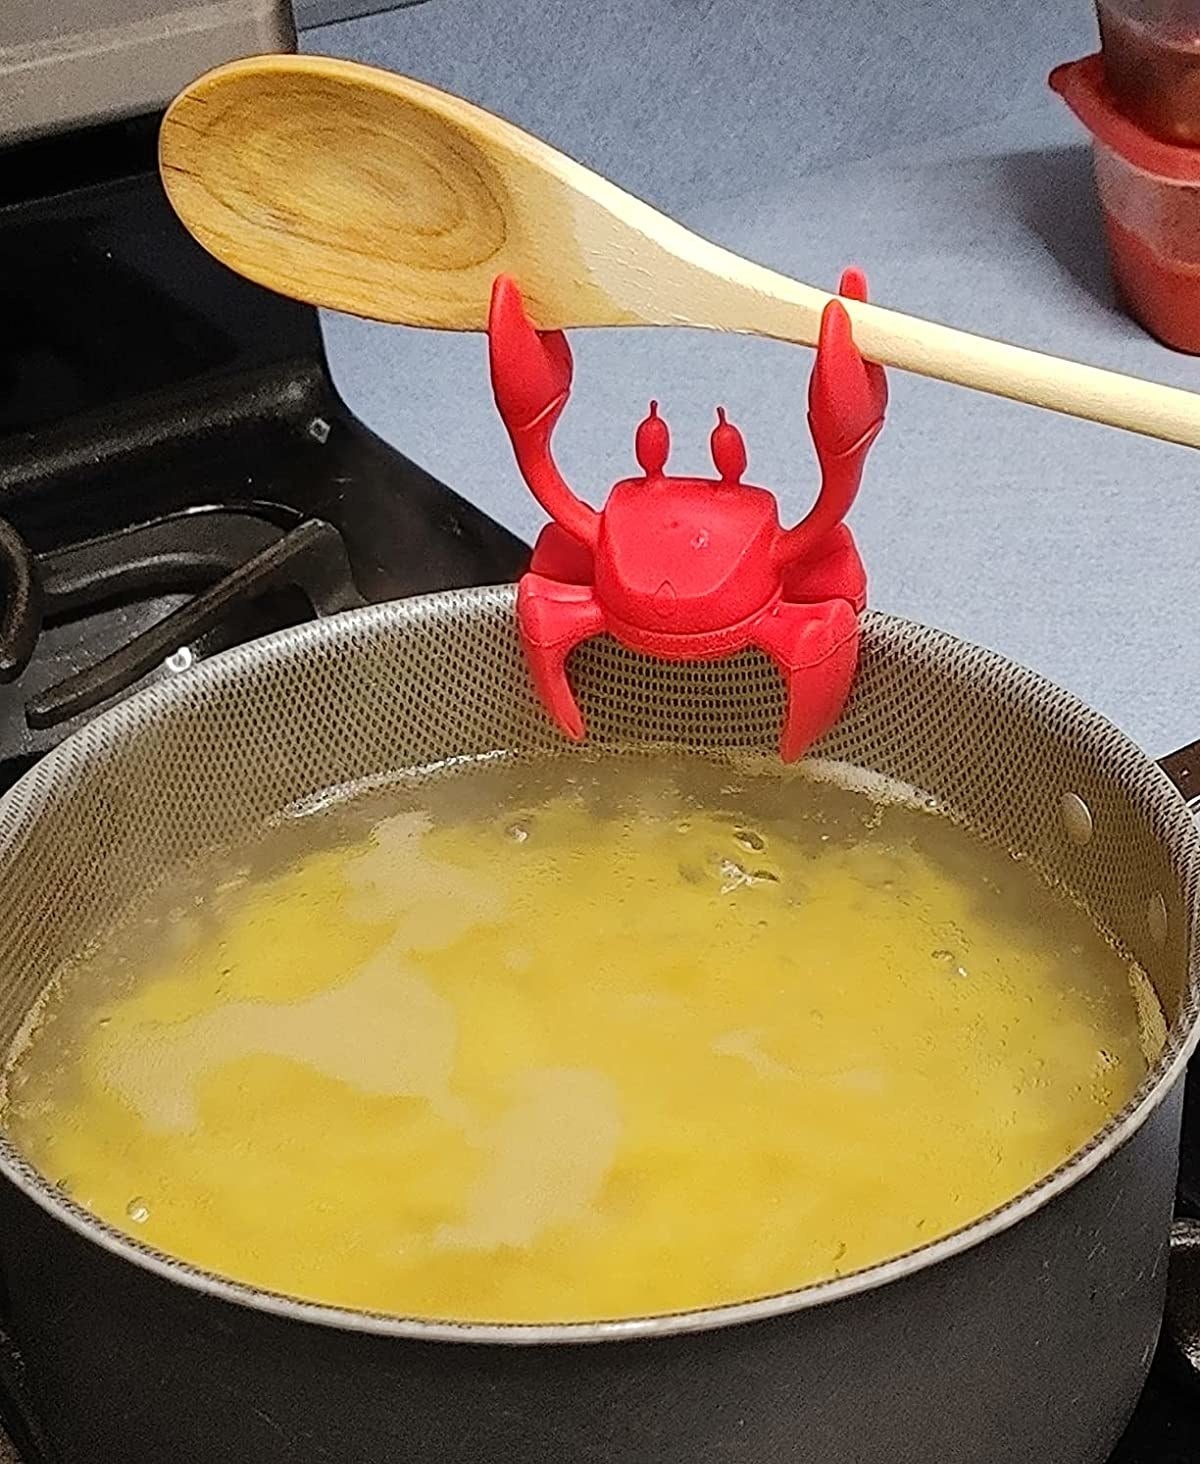 Reviewer image or red crab holding a spoon on their cooking pot